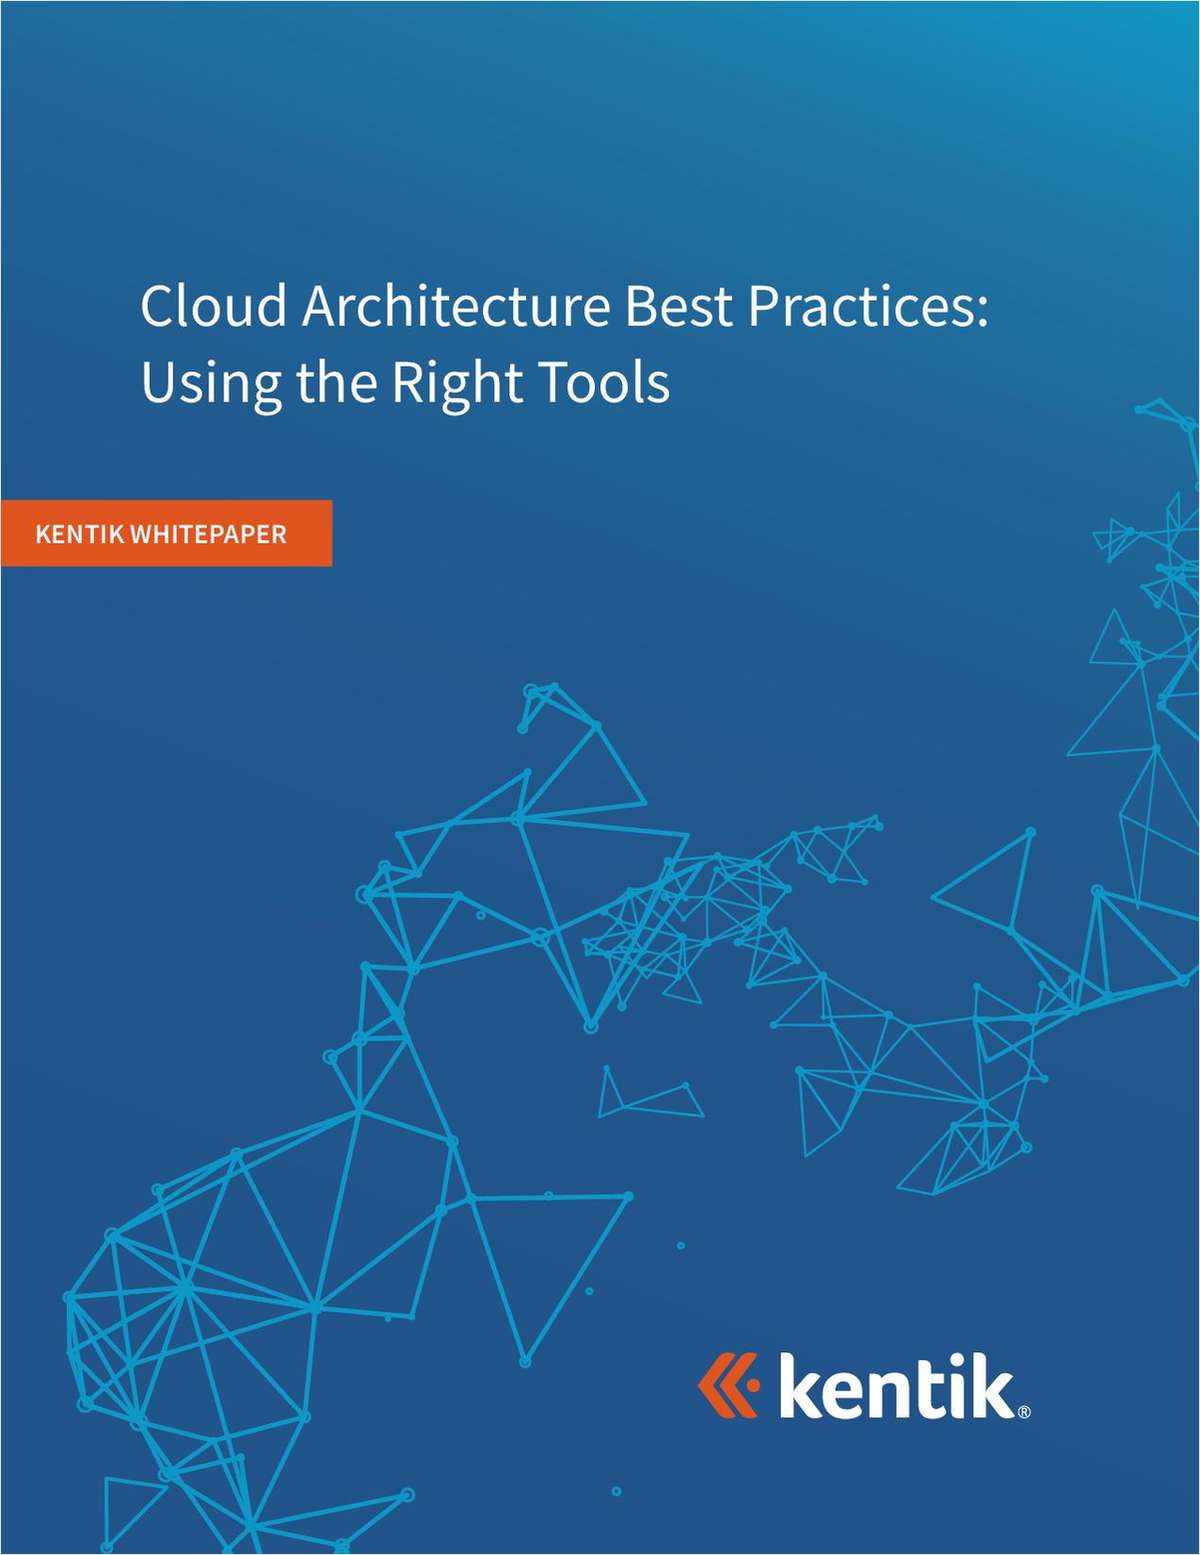 Cloud Architecture Best Practices: Using the Right Tools